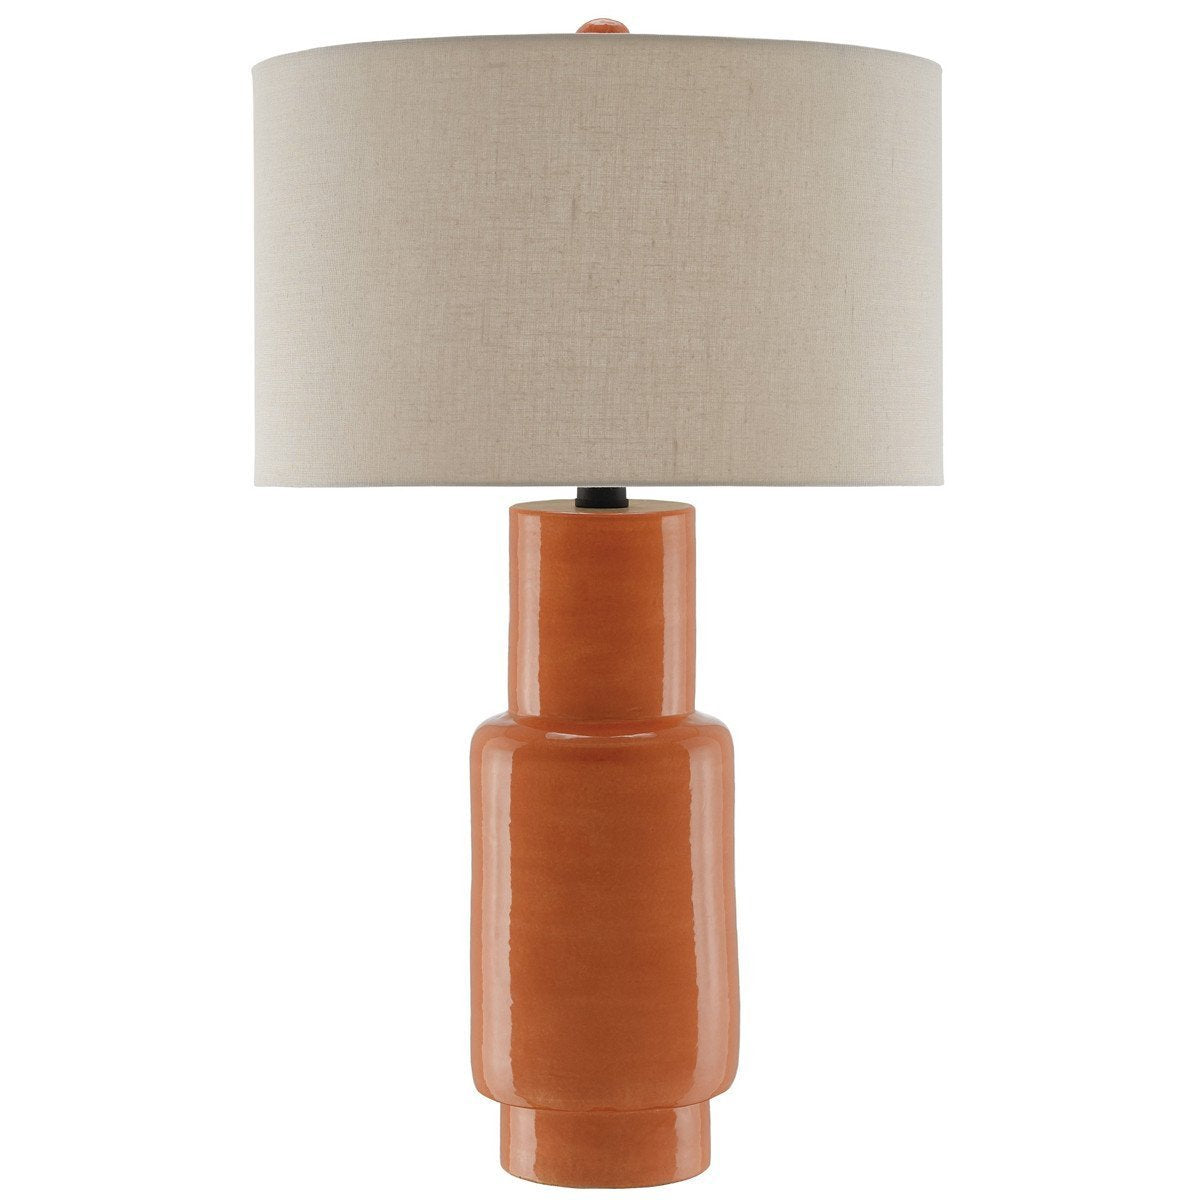 Currey and Company Janeen Table Lamp